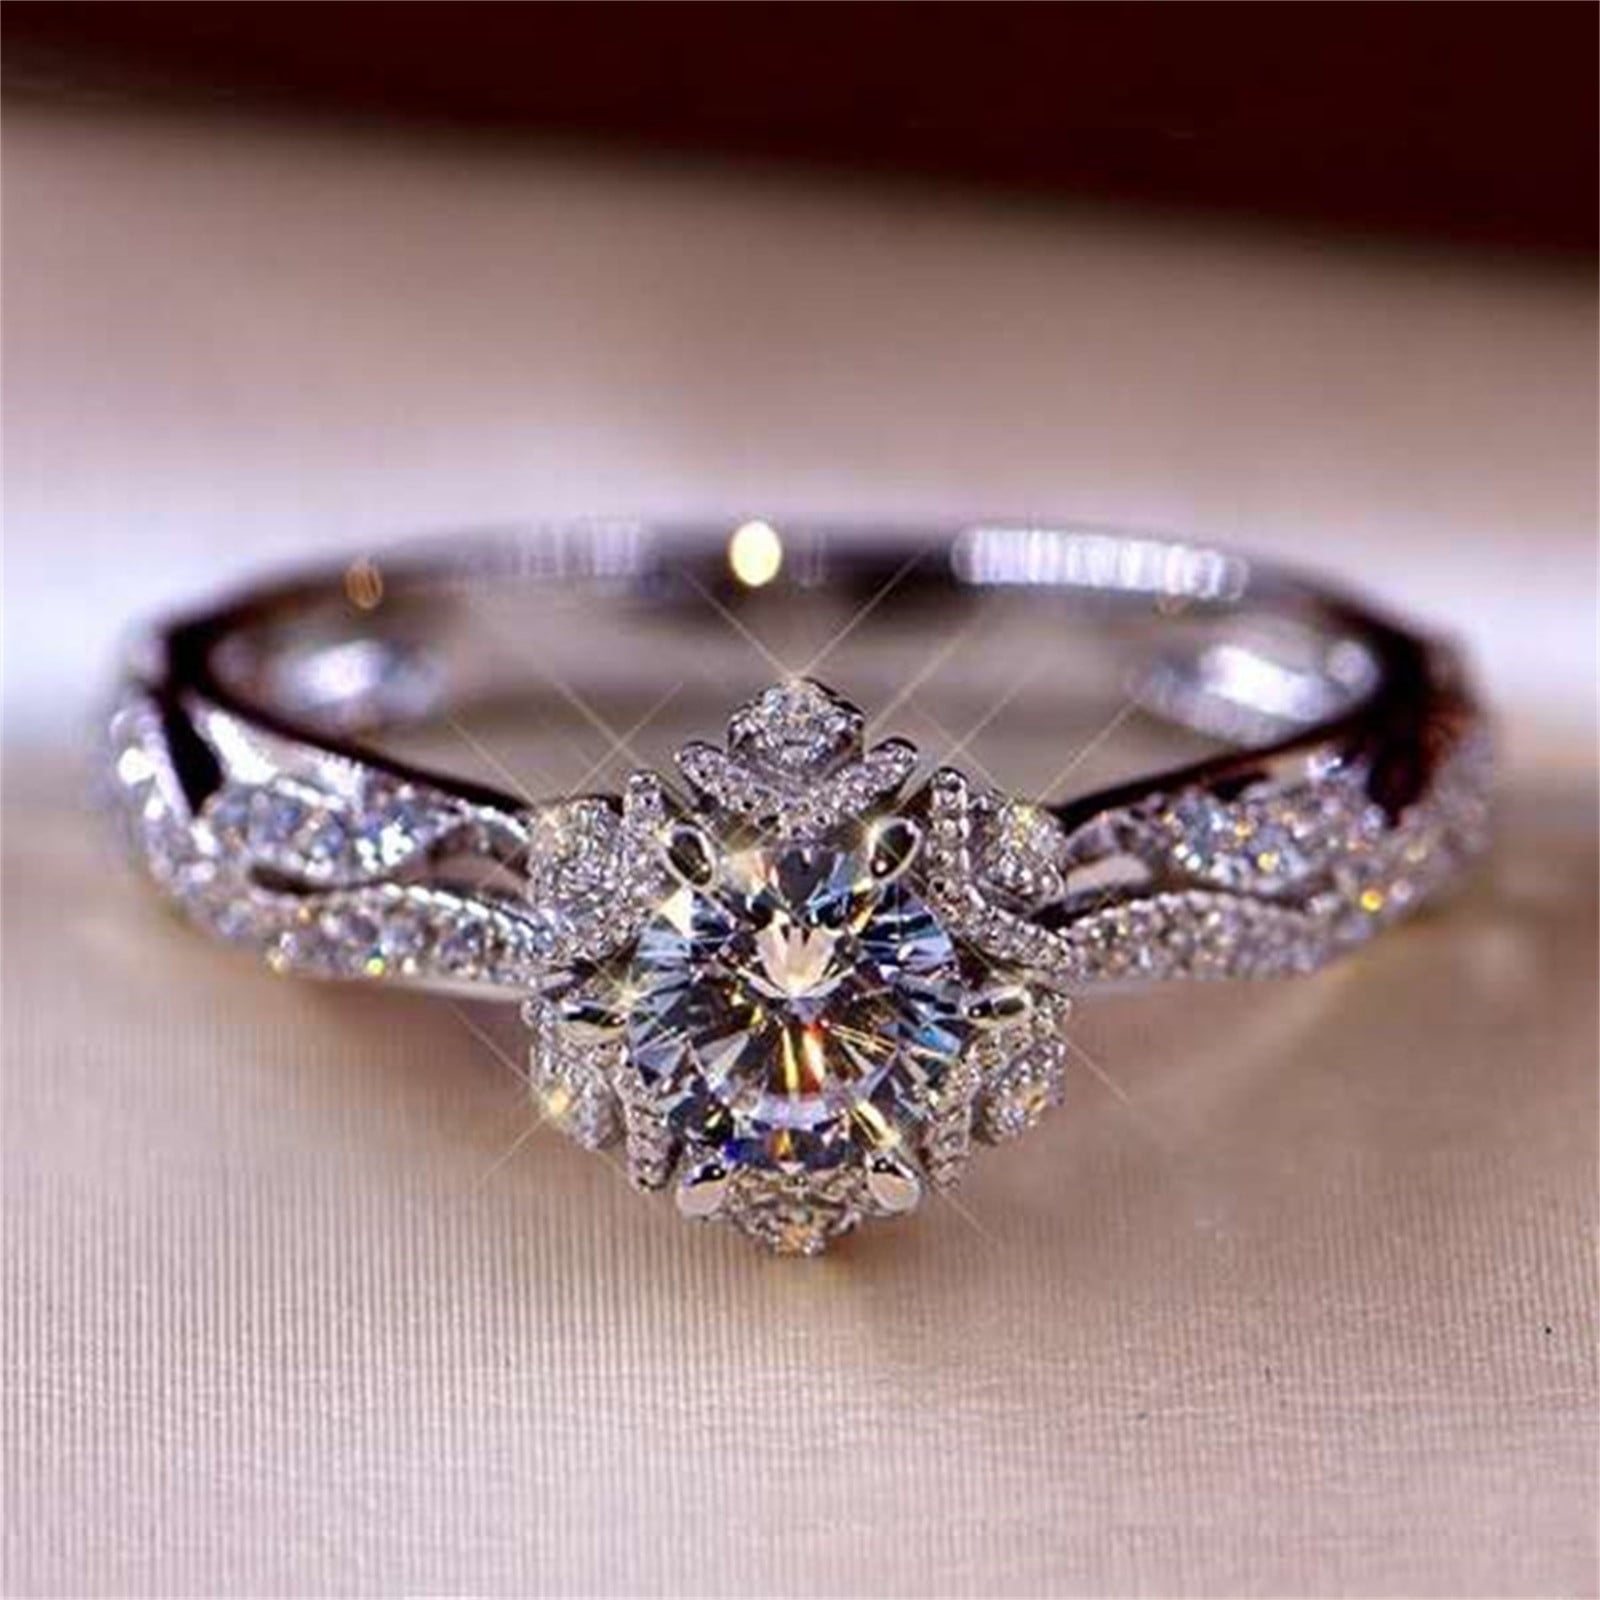 27 Incredibly Beautiful Diamond Engagement Rings | Beautiful engagement  rings, Beautiful wedding rings, Wedding rings solitaire